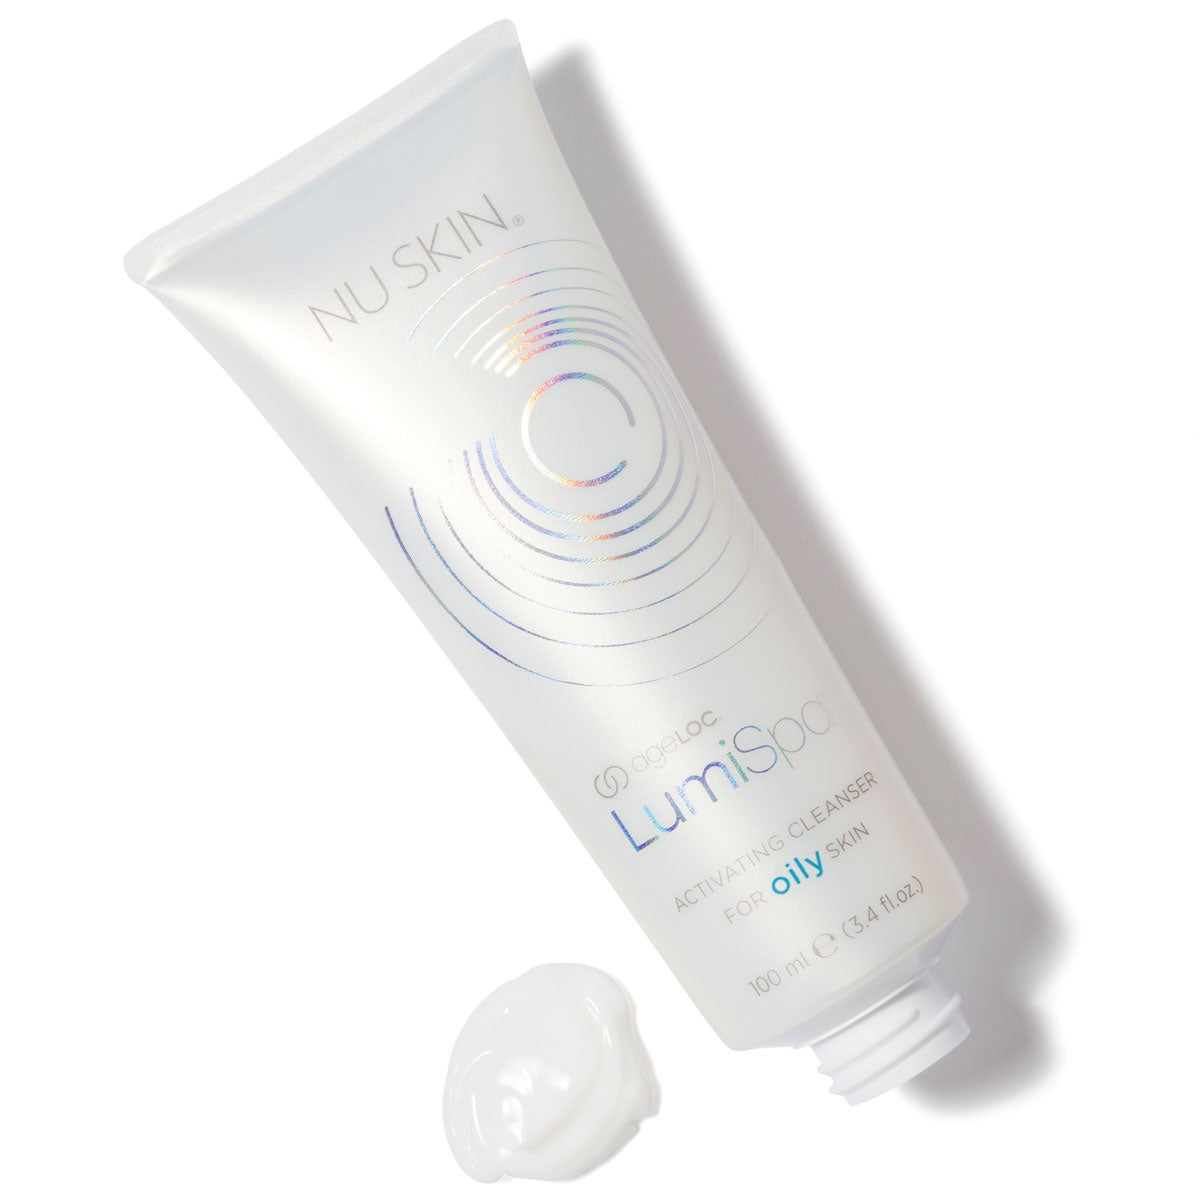 LumiSpa Cleanser for Oily Skin on White Background with Product Blob